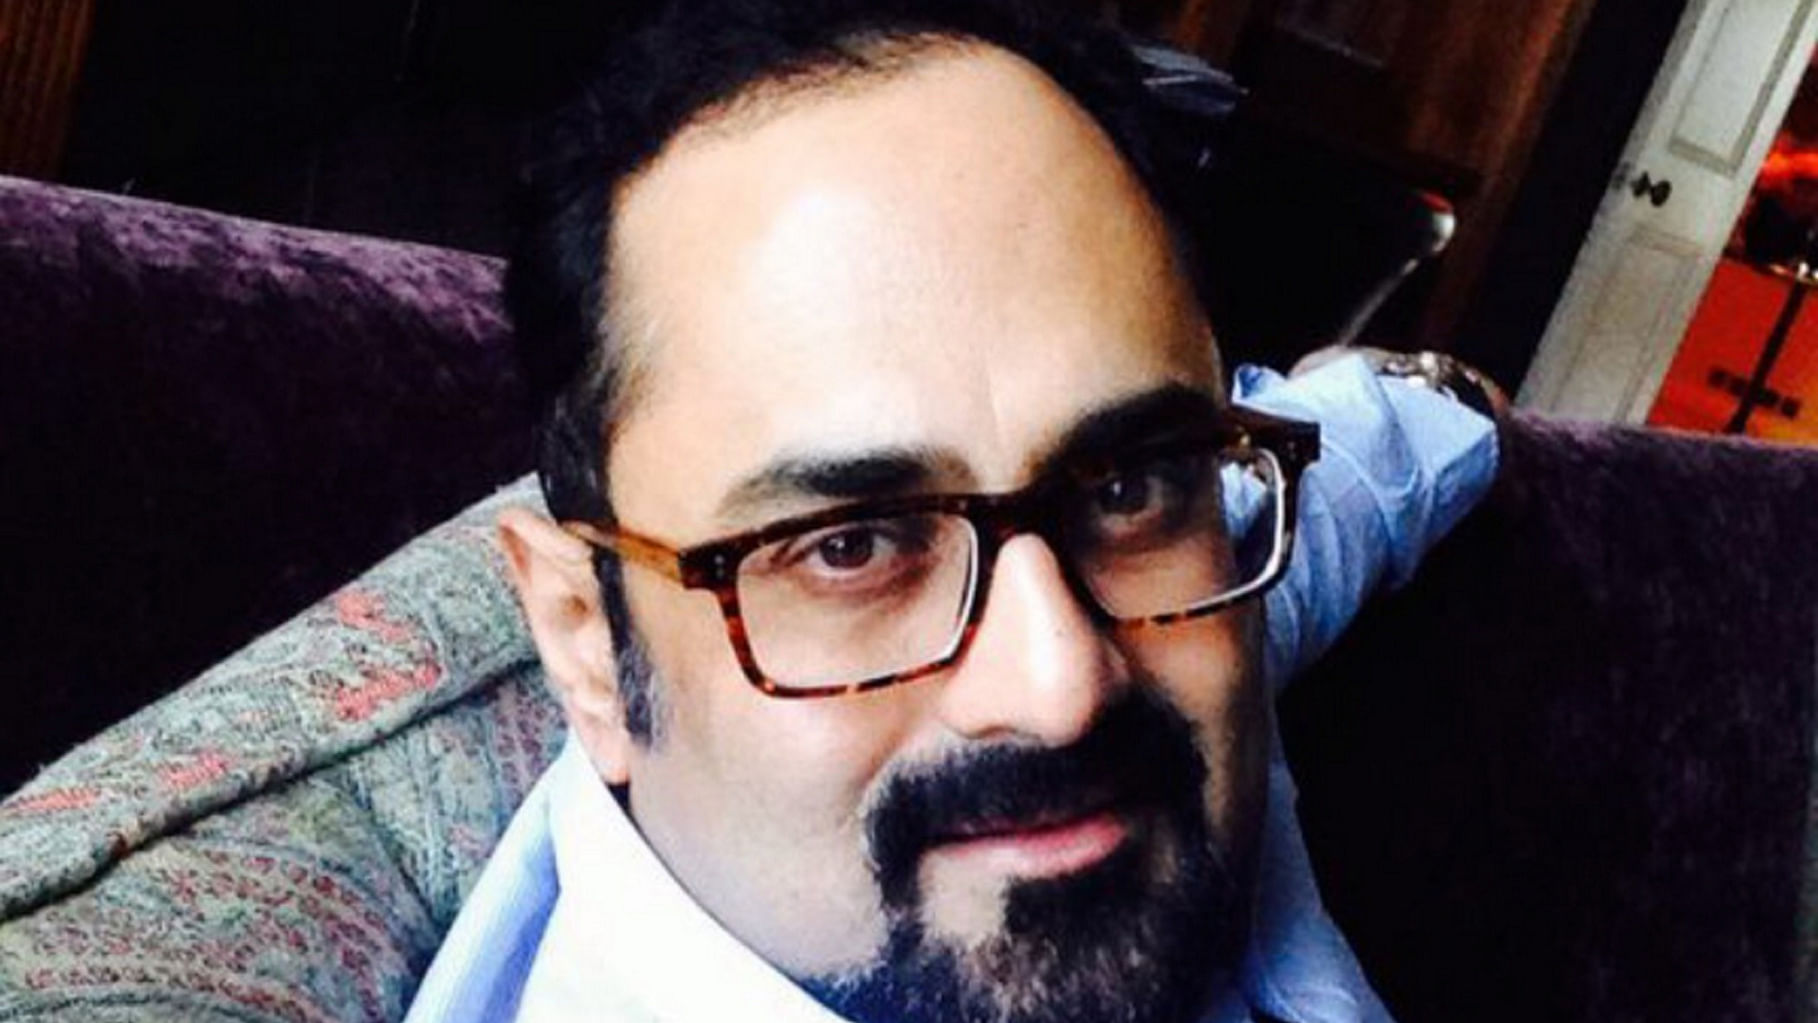 MP Rajeev Chandrasekhar has said that Telecom operators’ response to Trai’s paper is vague and irrelevant. (Coutesy: Twitter/ <a href="https://twitter.com/rajeev_mp/media">@rajeev_mp</a>)